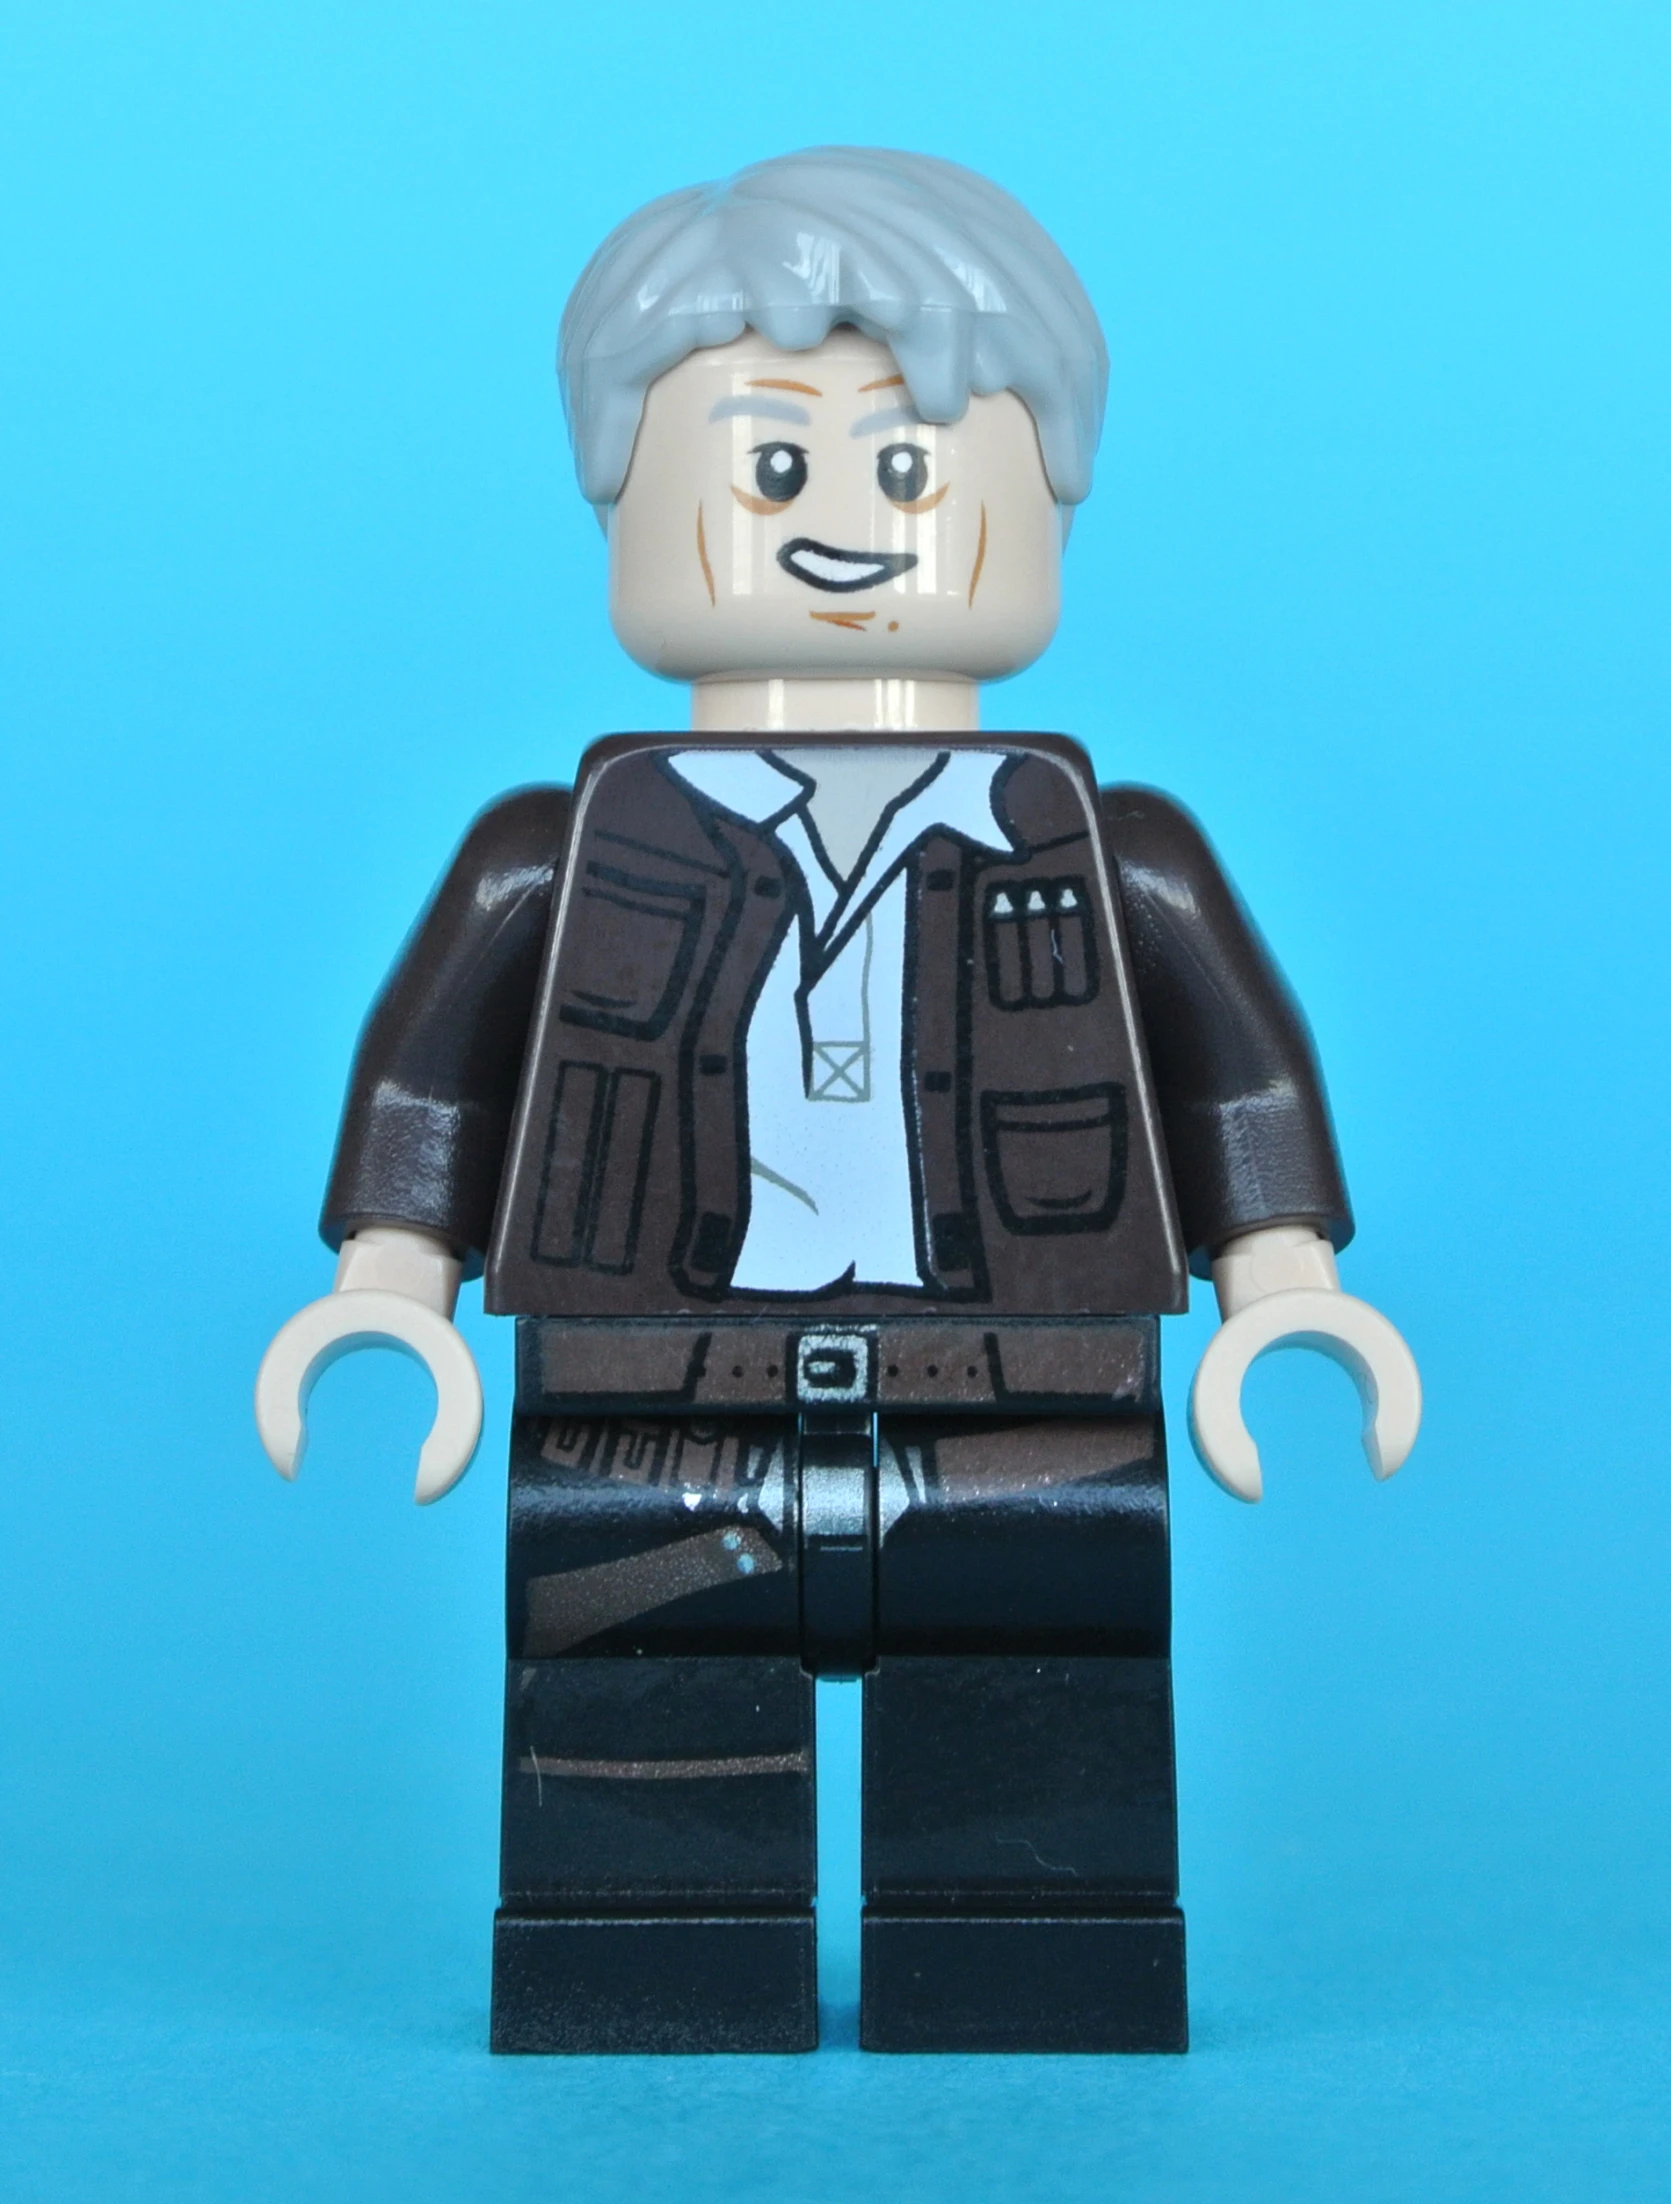 an lego man with gray hair is wearing a suit